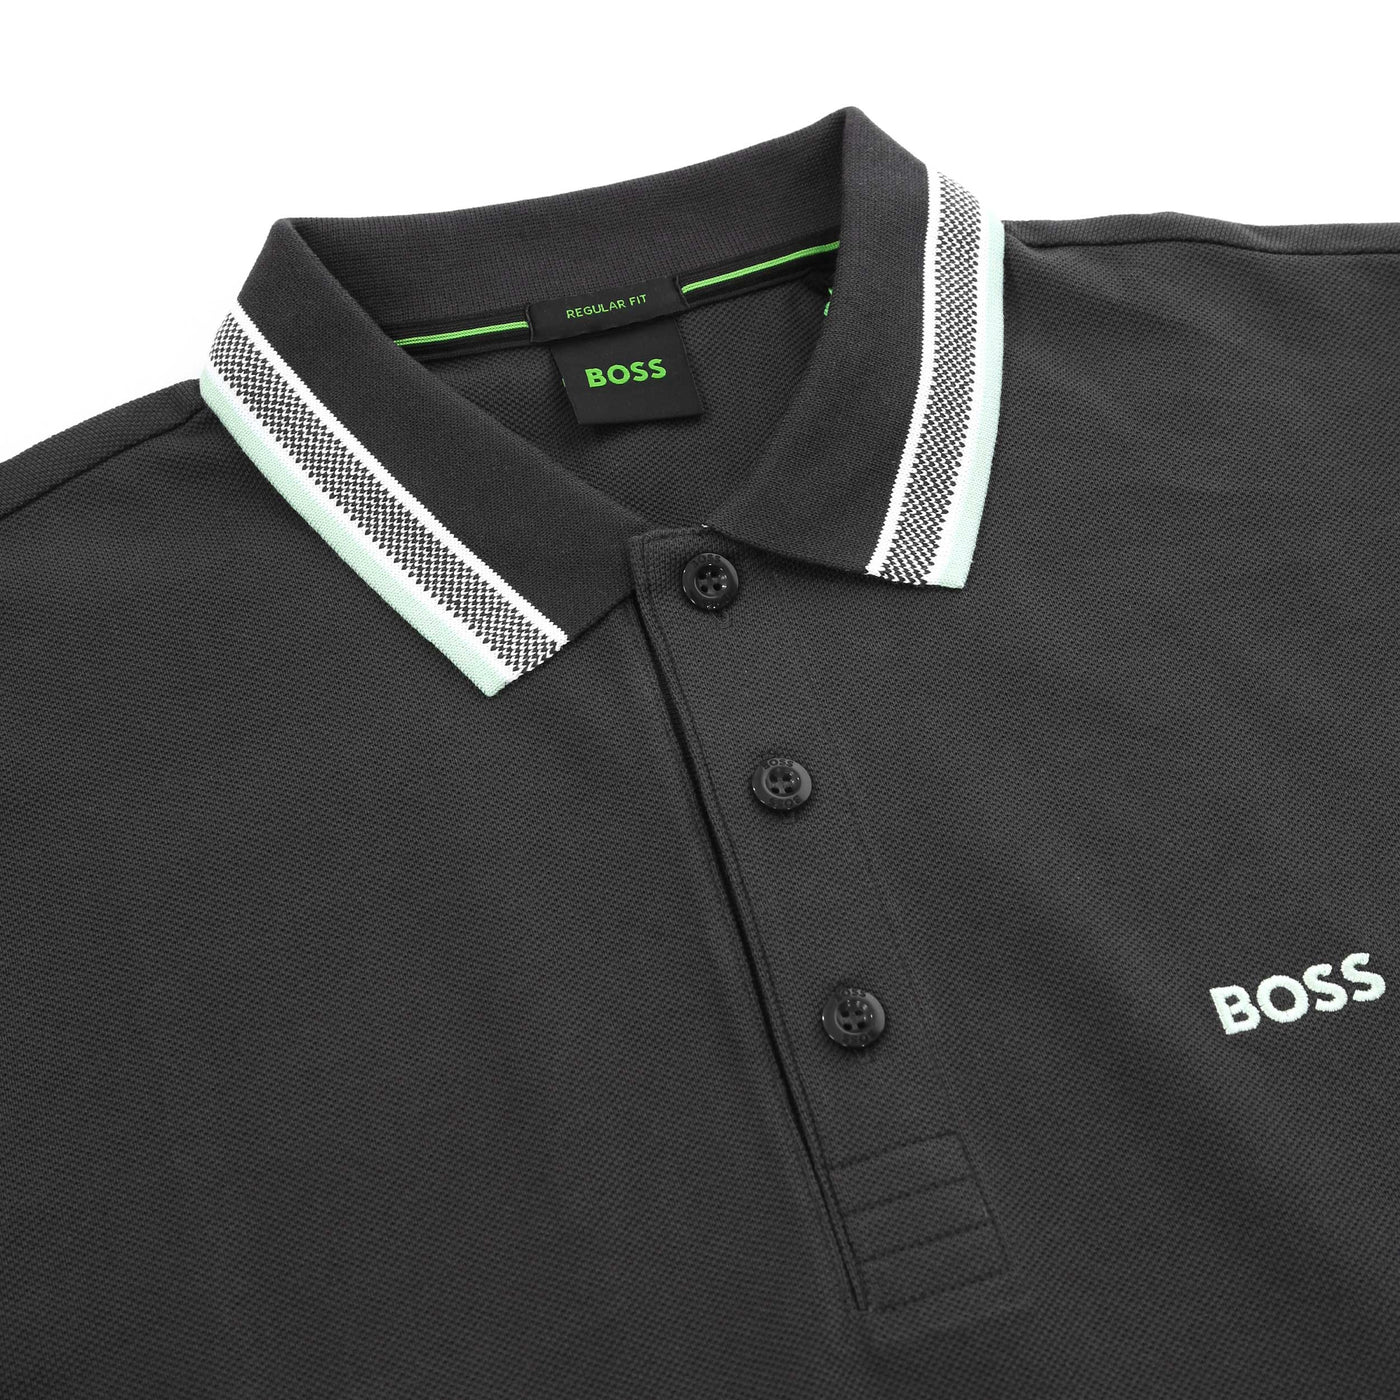 BOSS Paddy Polo Shirt in Charcoal & Mint Collar